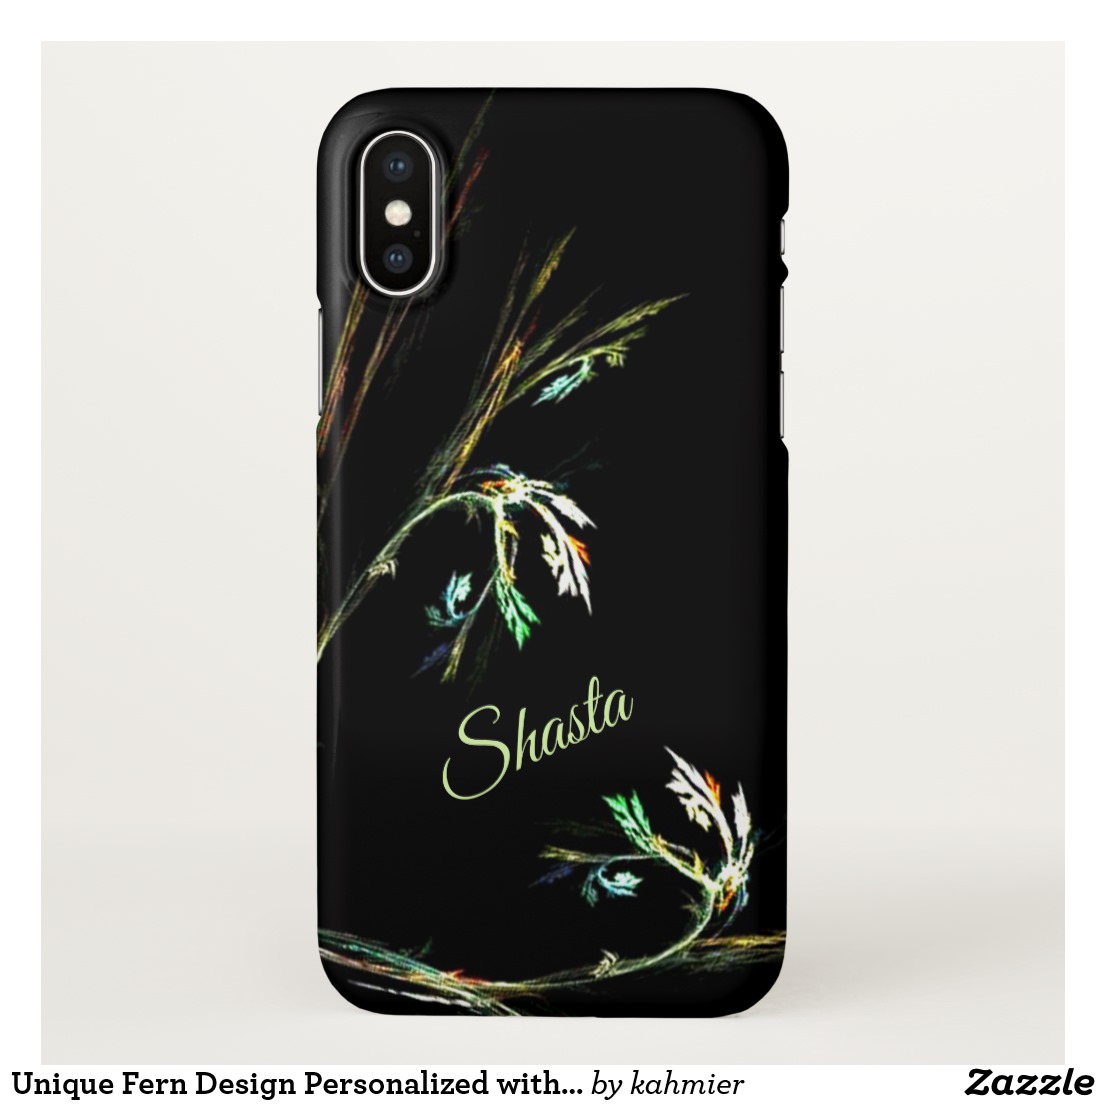 Unique Fern Design Personalized with Name iPhone Case